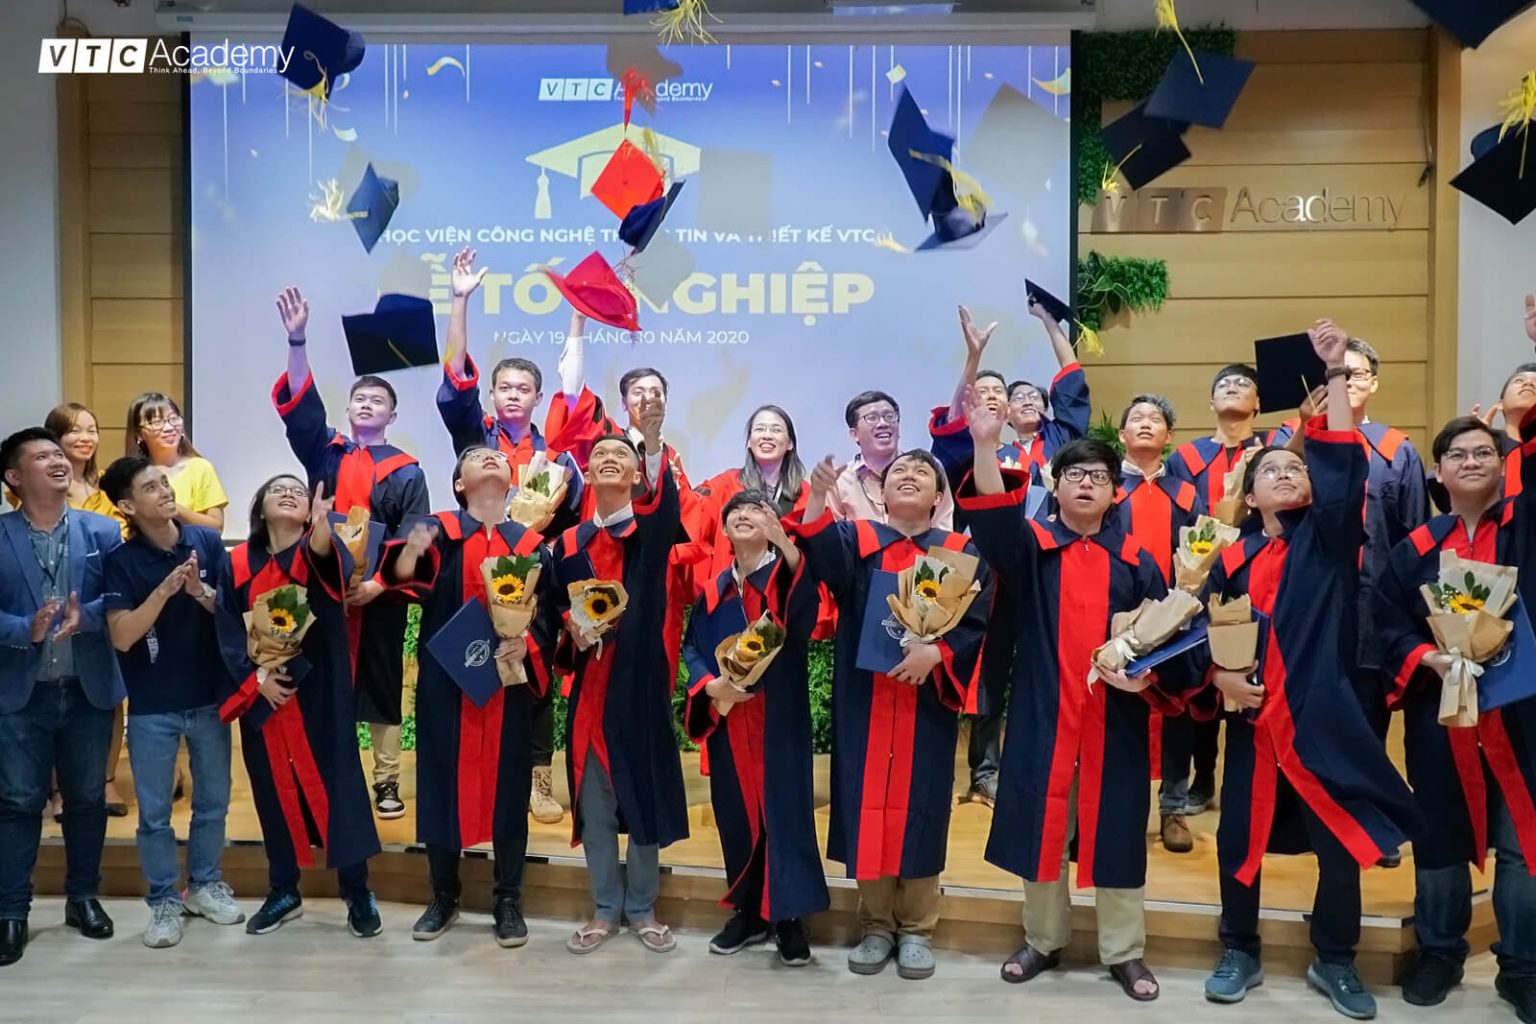 VTC Academy organizes Graduation Ceremony for students in Ho Chi Minh City